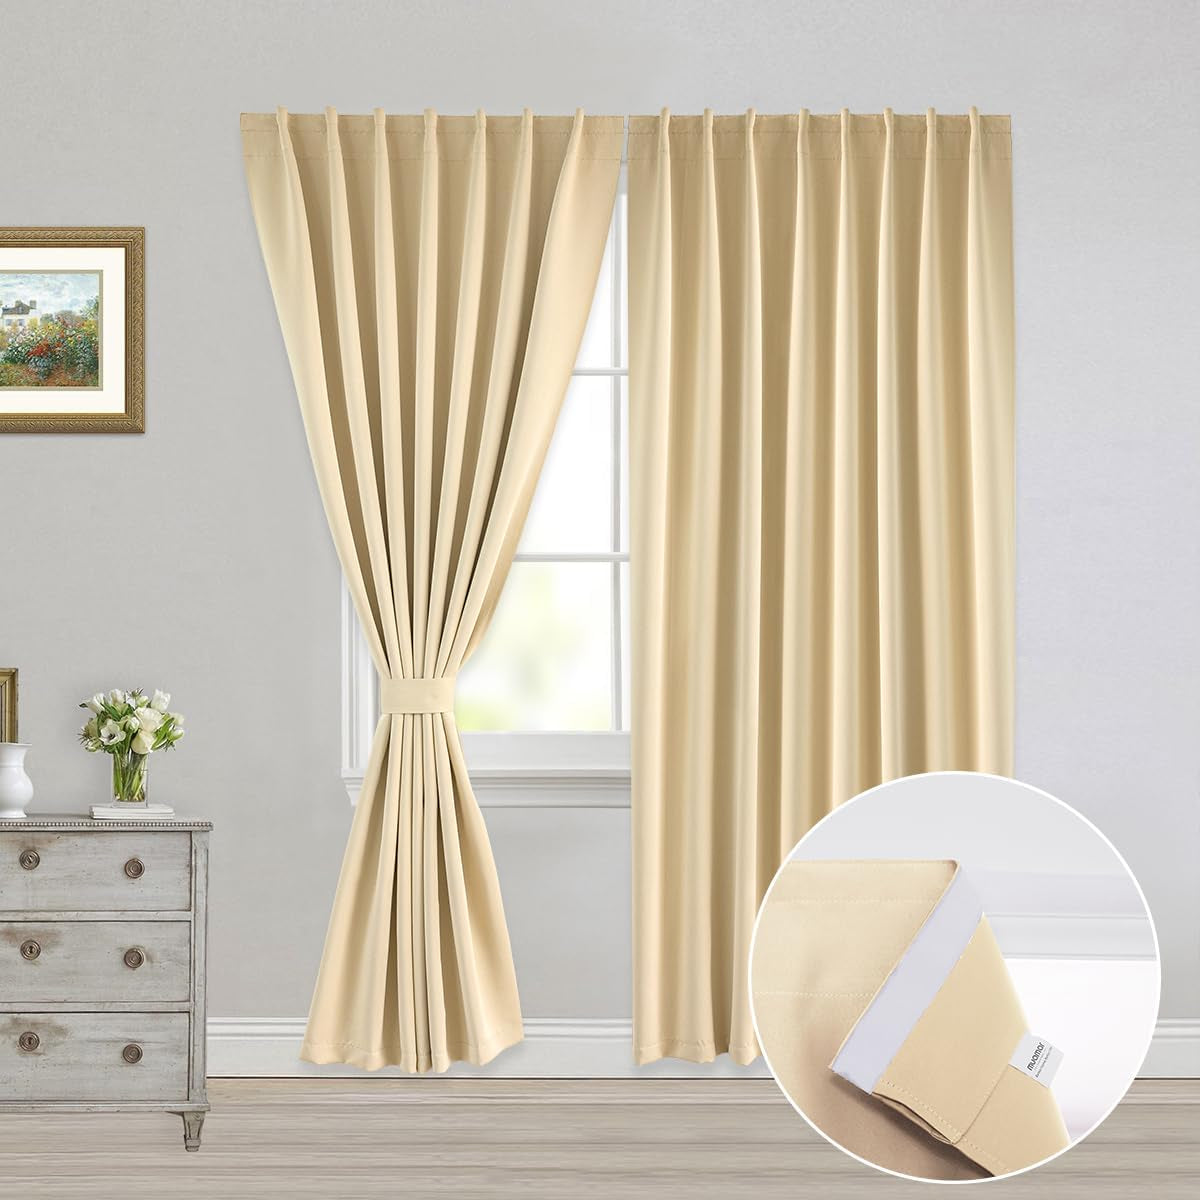 Muamar 2Pcs Blackout Curtains Privacy Curtains 63 Inch Length Window Curtains,Easy Install Thermal Insulated Window Shades,Stick Curtains No Rods, Black 42" W X 63" L  Muamar Beige 52"W X 84"L 